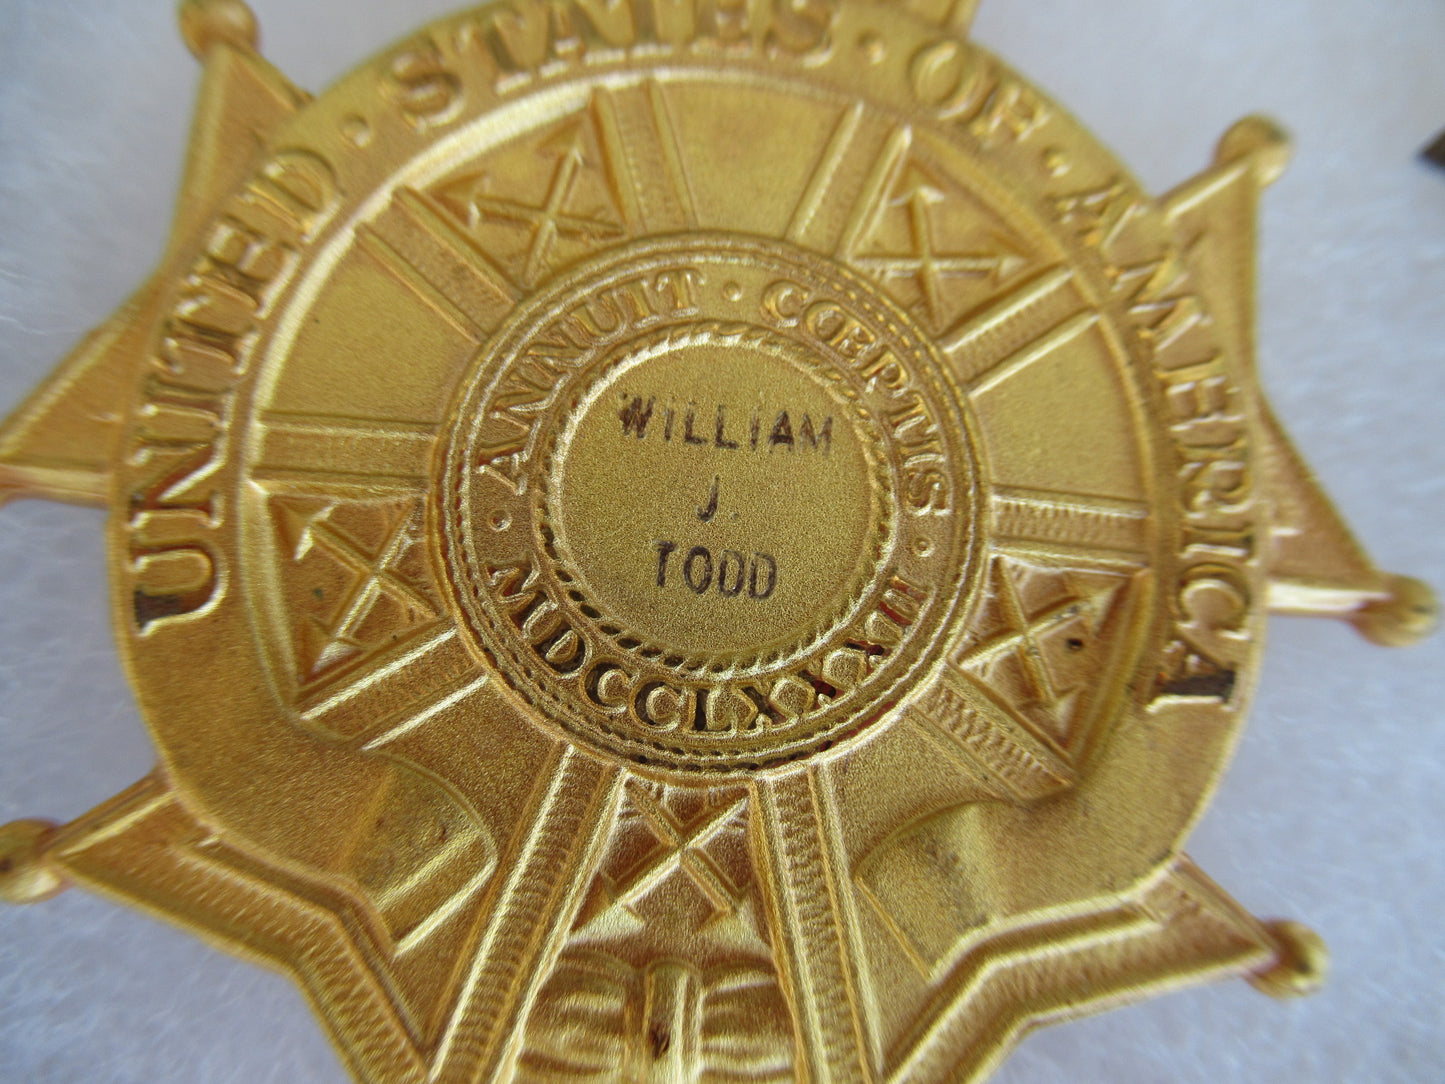 USA GROUP OF MEDALS DOCUMENTS BELONGING TO LT. COL. WILLIAM J. TODD.